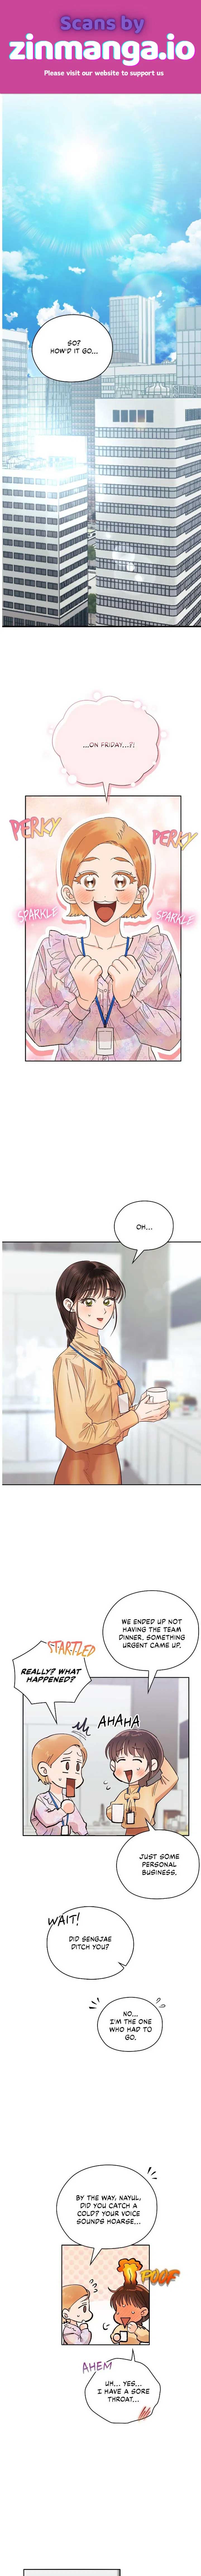 Quiet in the Office! chapter 30